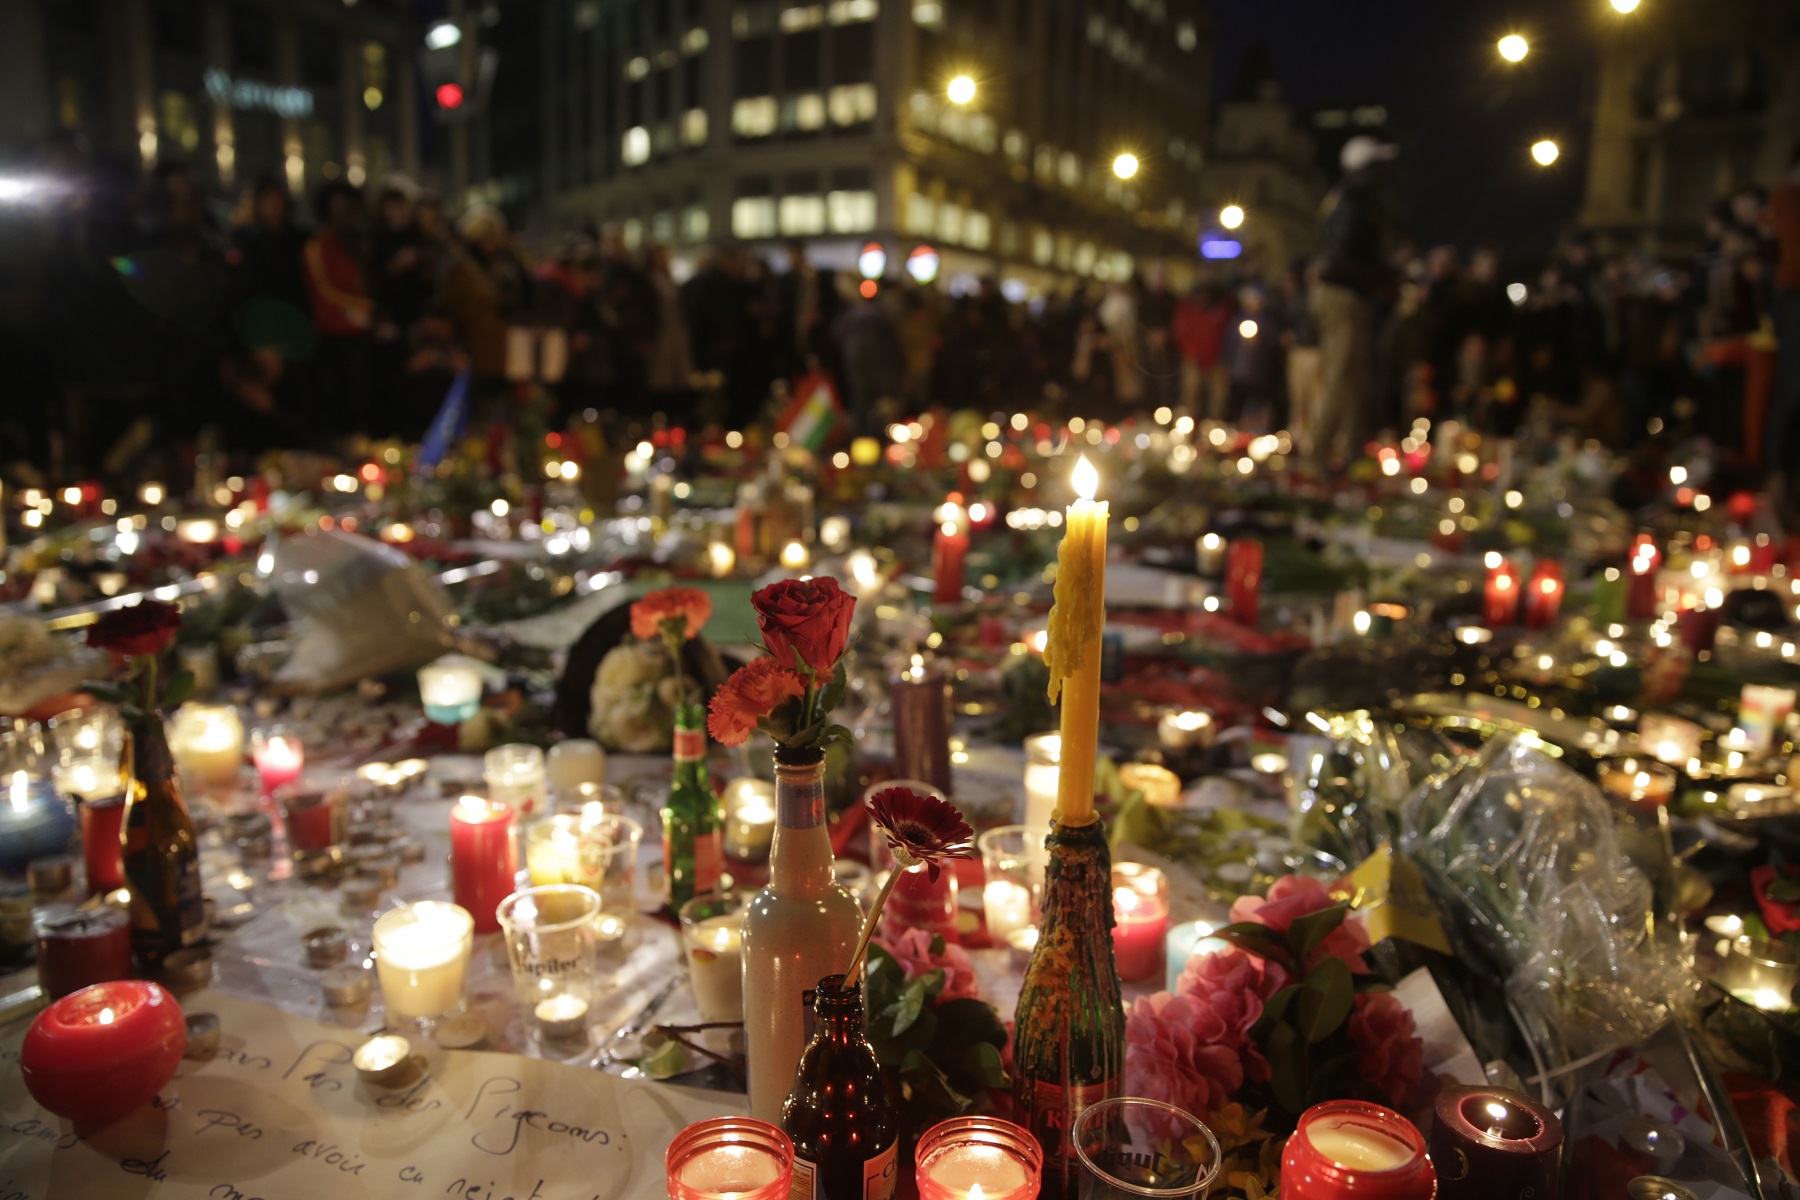 Flowers and candles are pictured as people gather at a makeshift memorial on the Place de la Bourse (Beursplein) in Brussels on March 23, 2016, a day after a triple bomb attack, which responsibility was claimed by the Islamic State group, left 31 dead and hundreds injured in the Belgian capital. World leaders united in condemning the carnage in Brussels and vowed to combat terrorism, after Islamic State bombers killed 31 people in a strike at the symbolic heart of the EU. AFP PHOTO / KENZO TRIBOUILLARD / AFP / KENZO TRIBOUILLARD